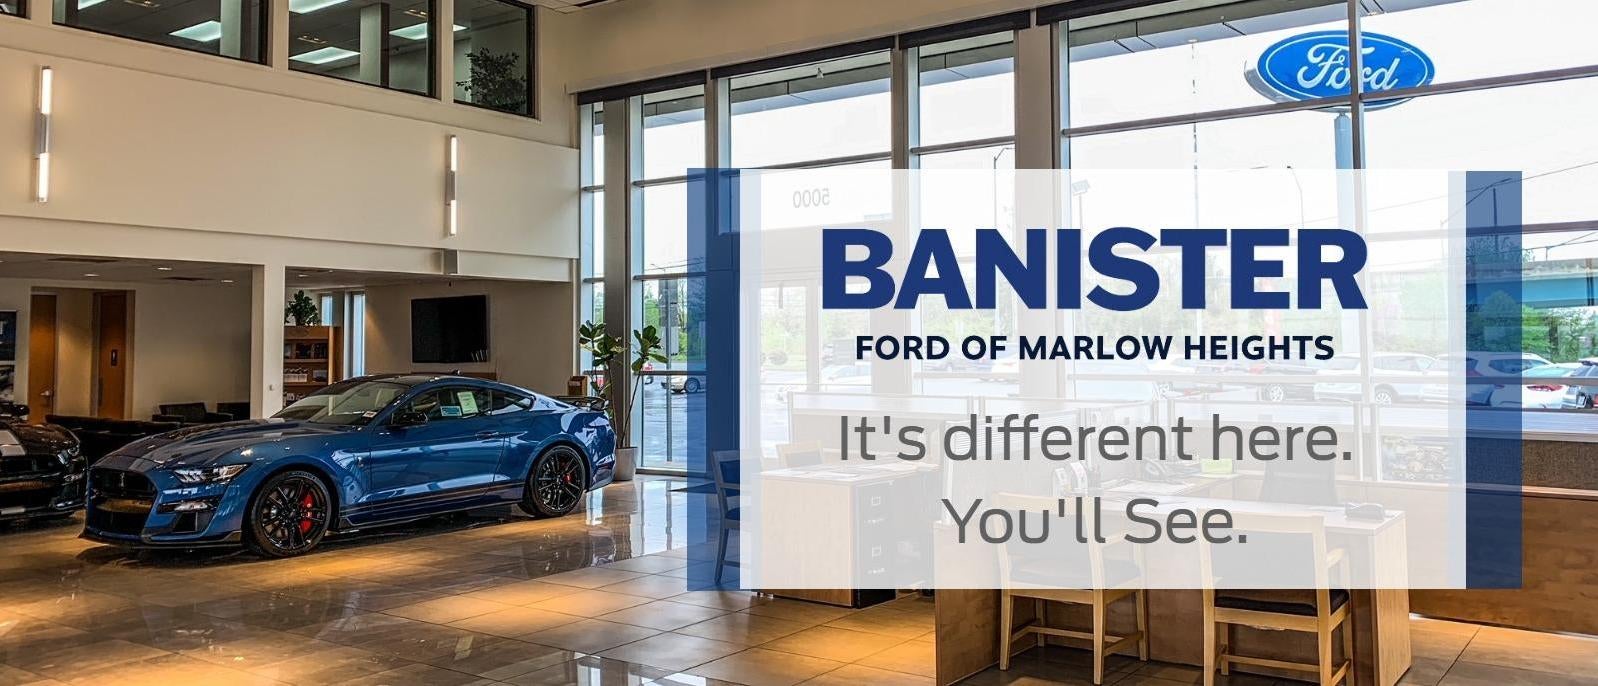 Banister Ford of Marlow Heights in Suitland MD